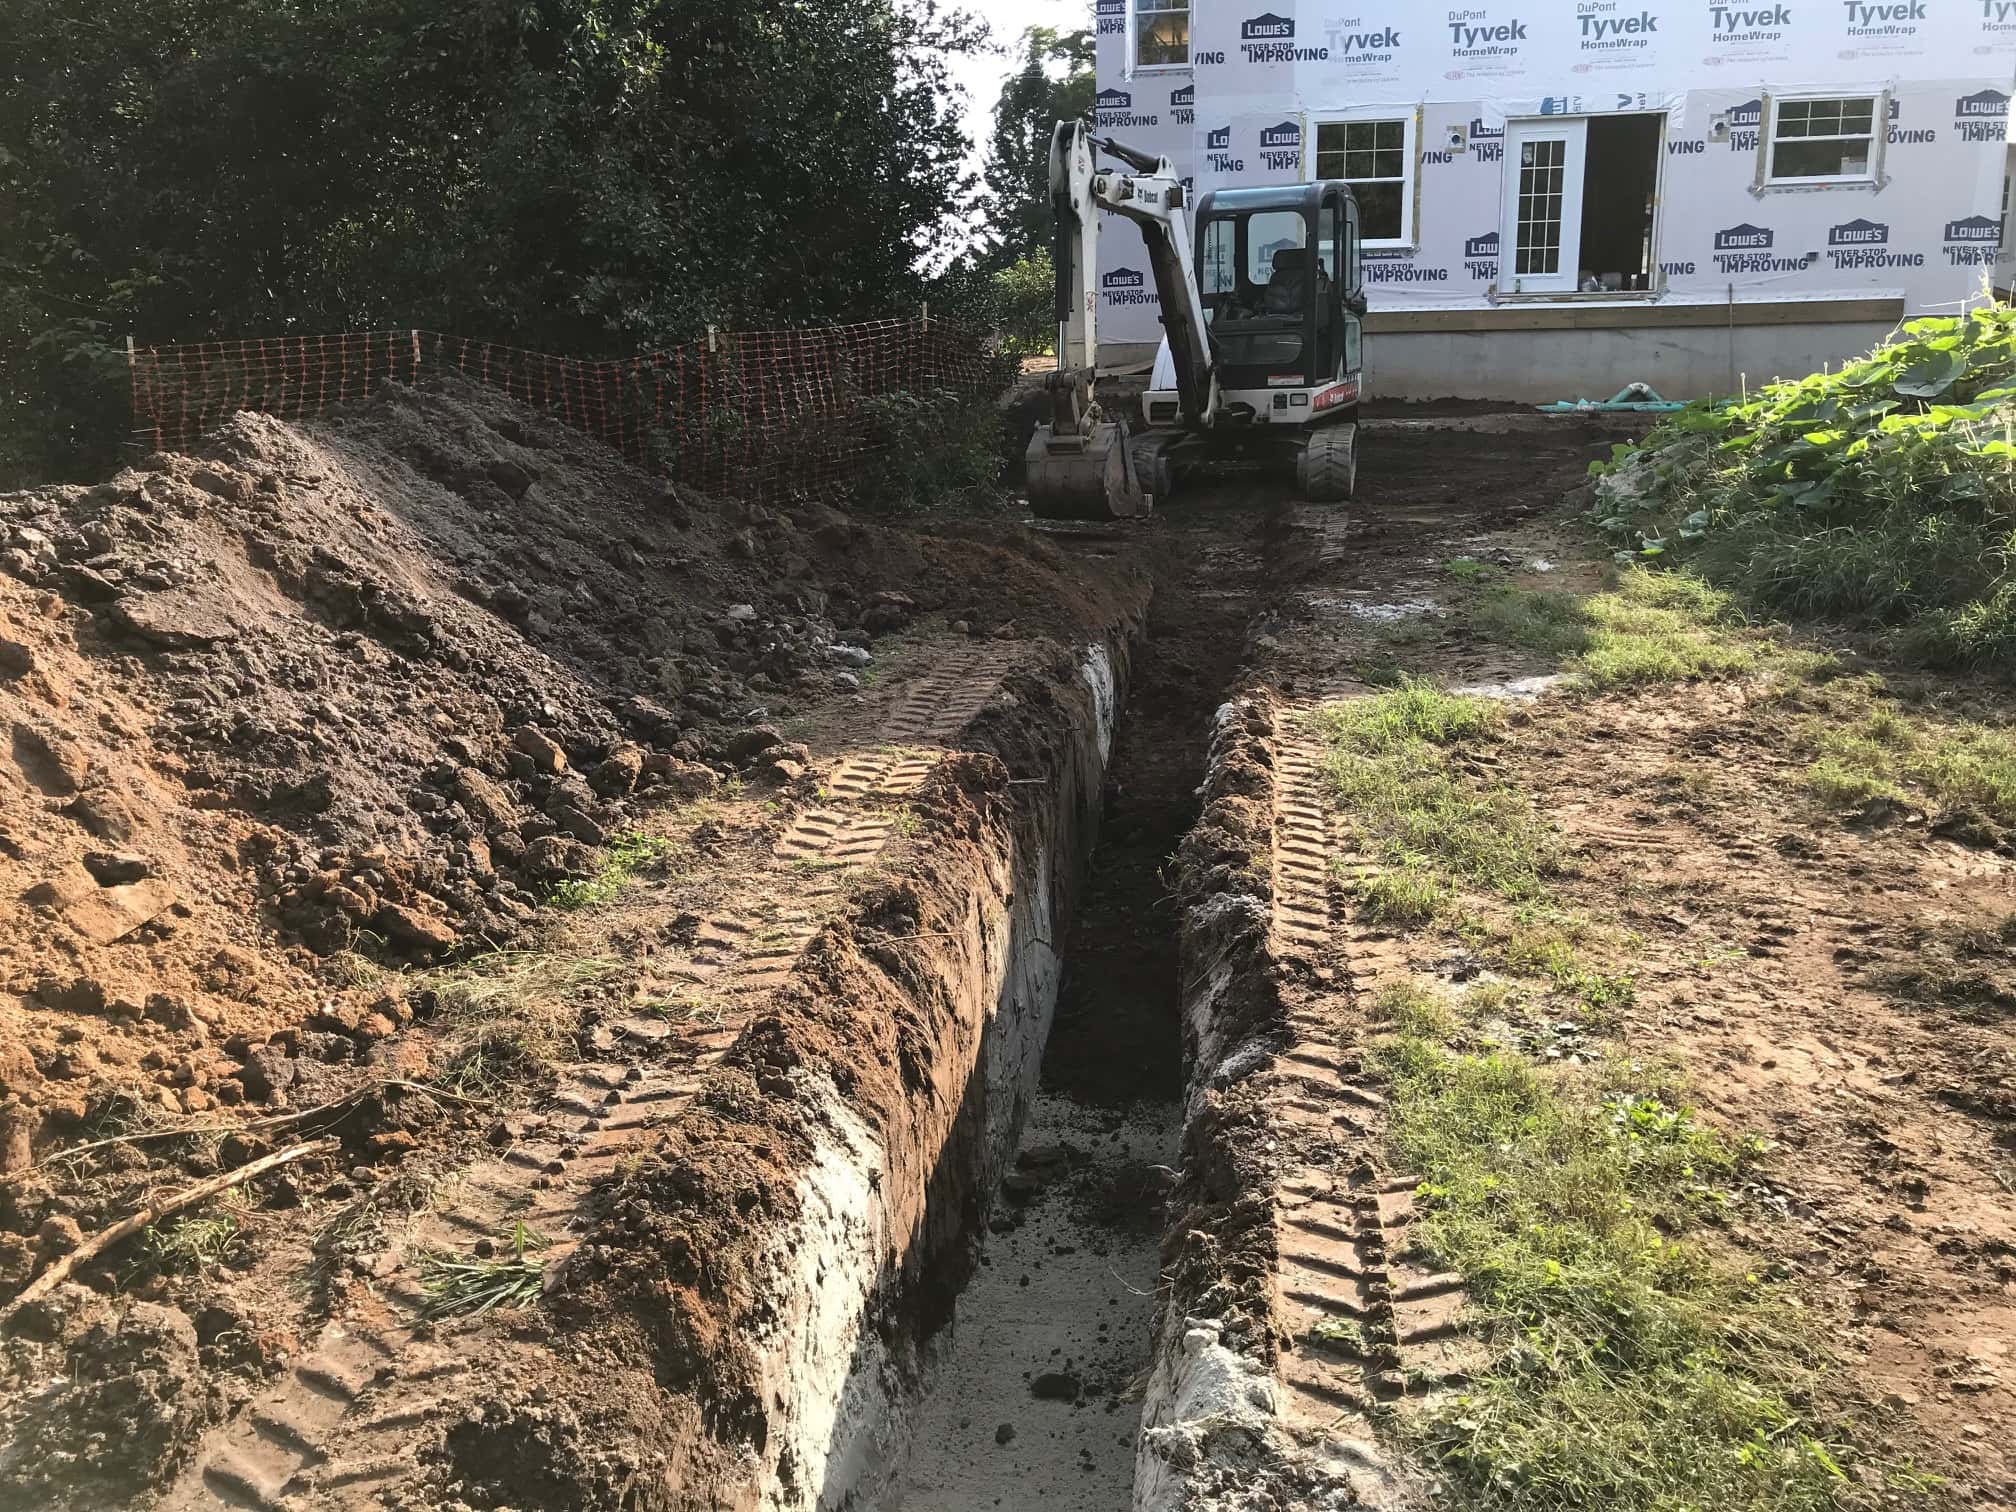 GBR dig trenches from the downspout locations to the storm water facility